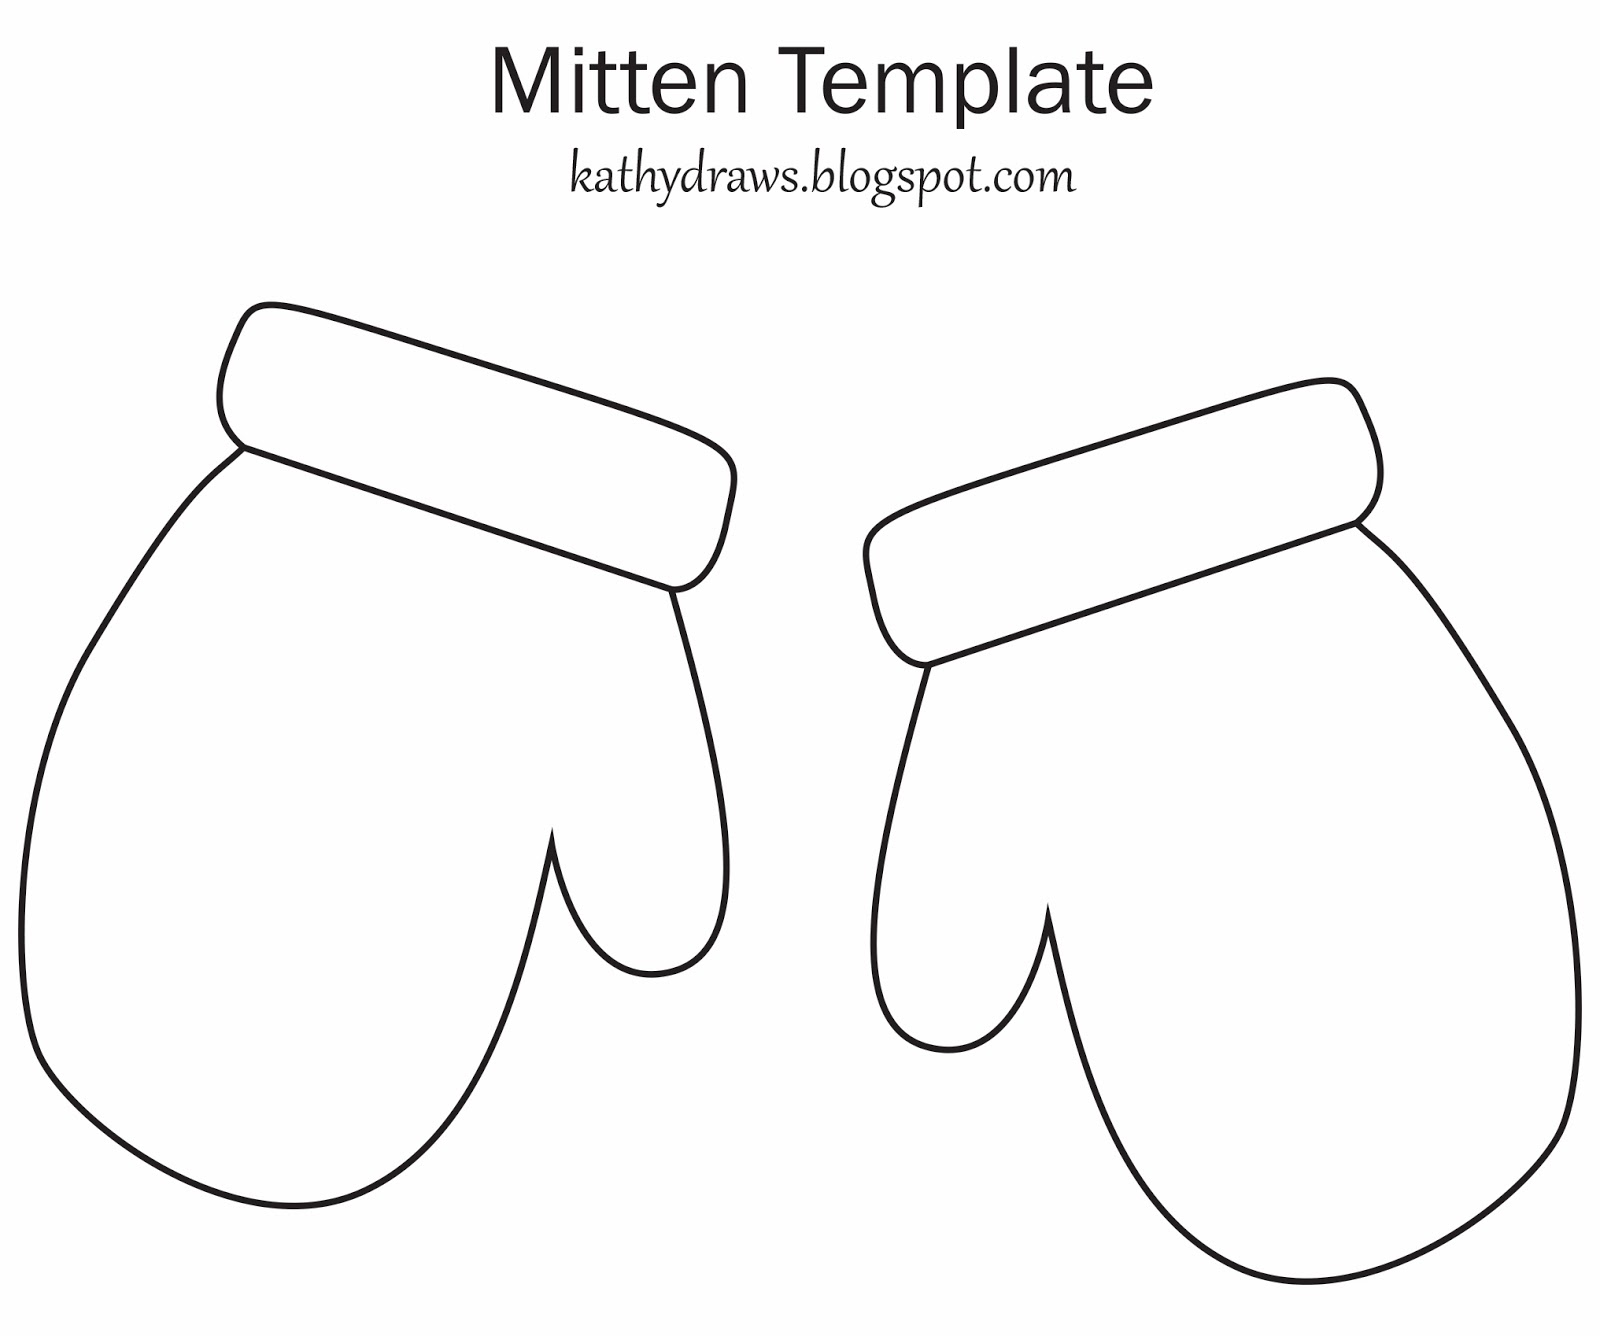 mitten-black-and-white-clipart-clip-art-library